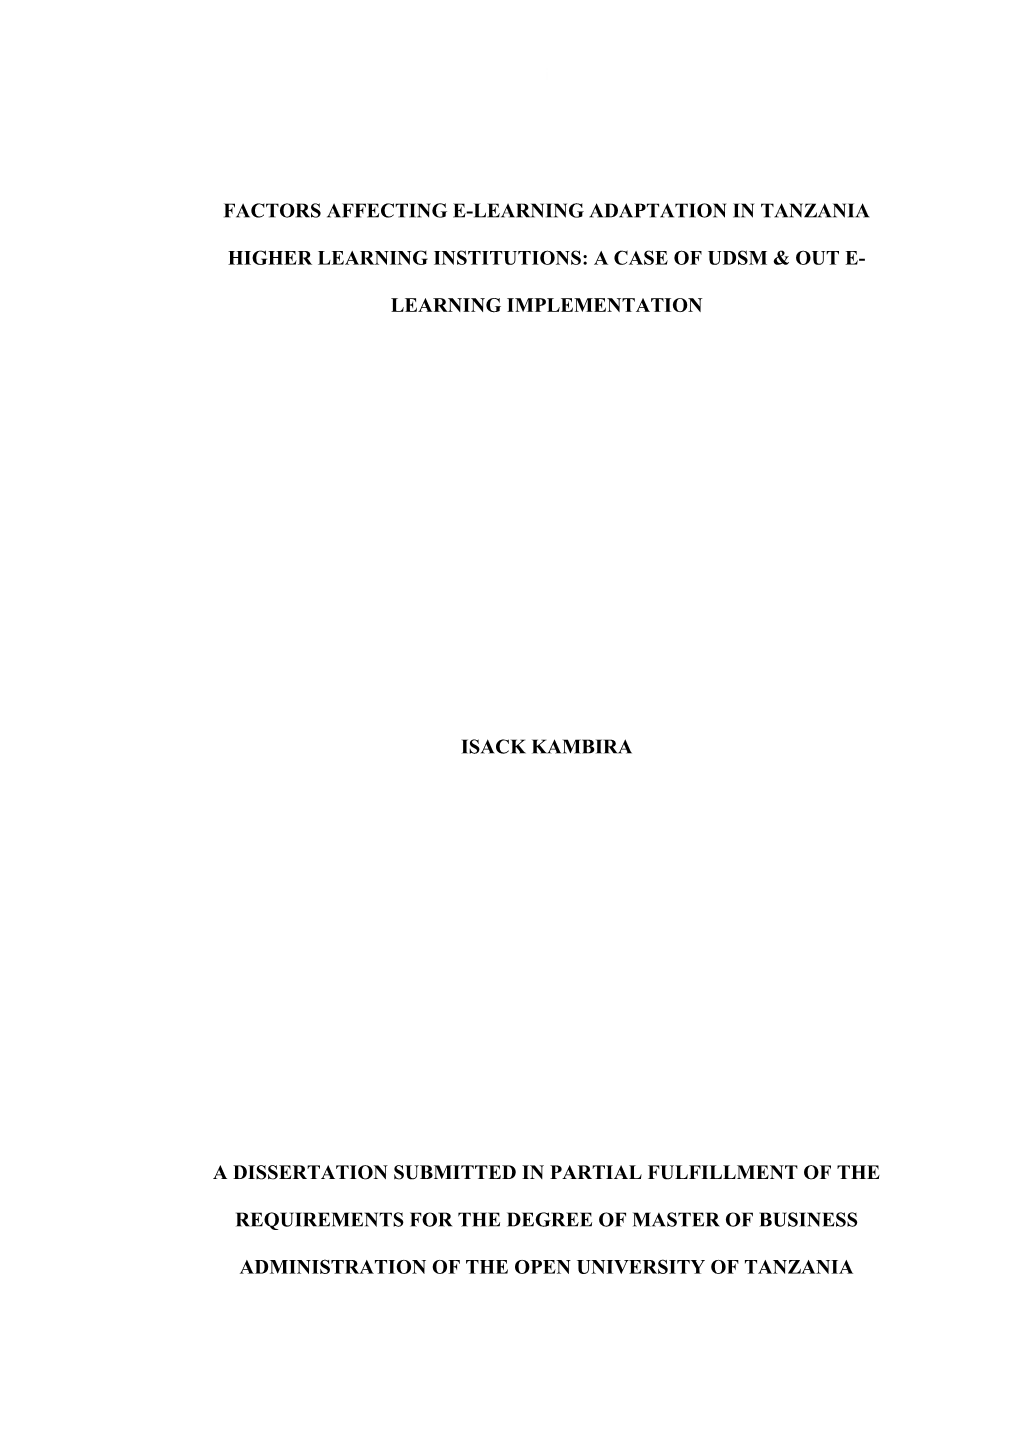 A Dissertation Submitted in Partial Fulfillment of The